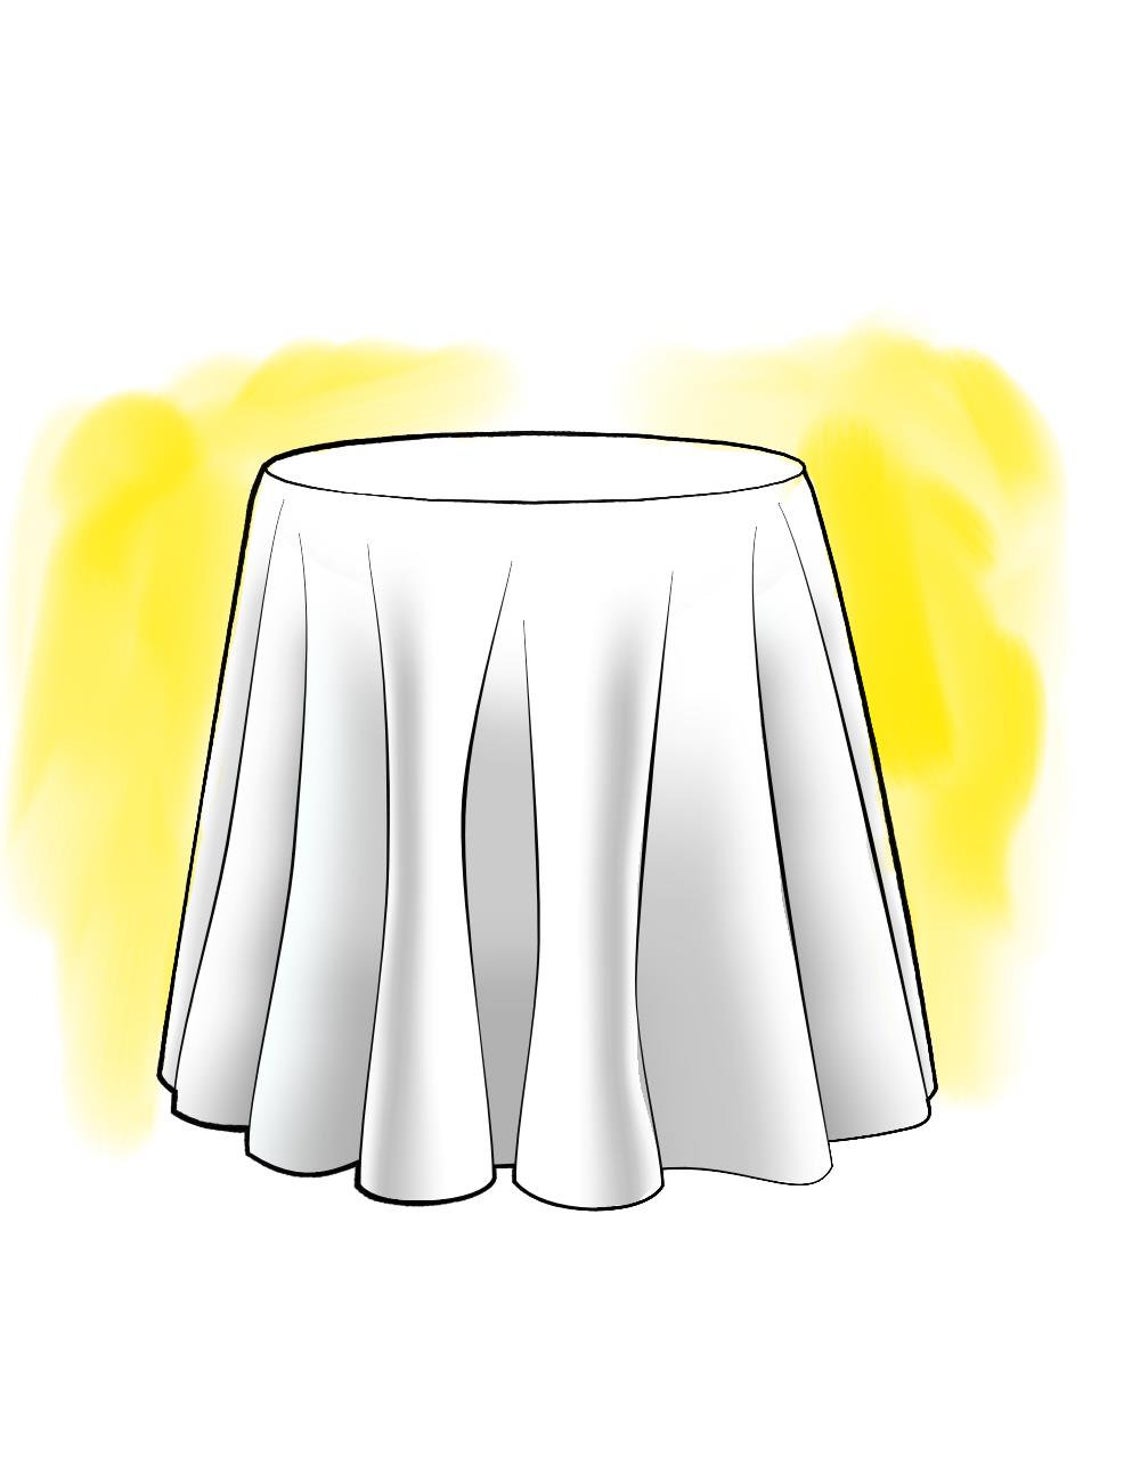 round tablecloth in diamond black and white